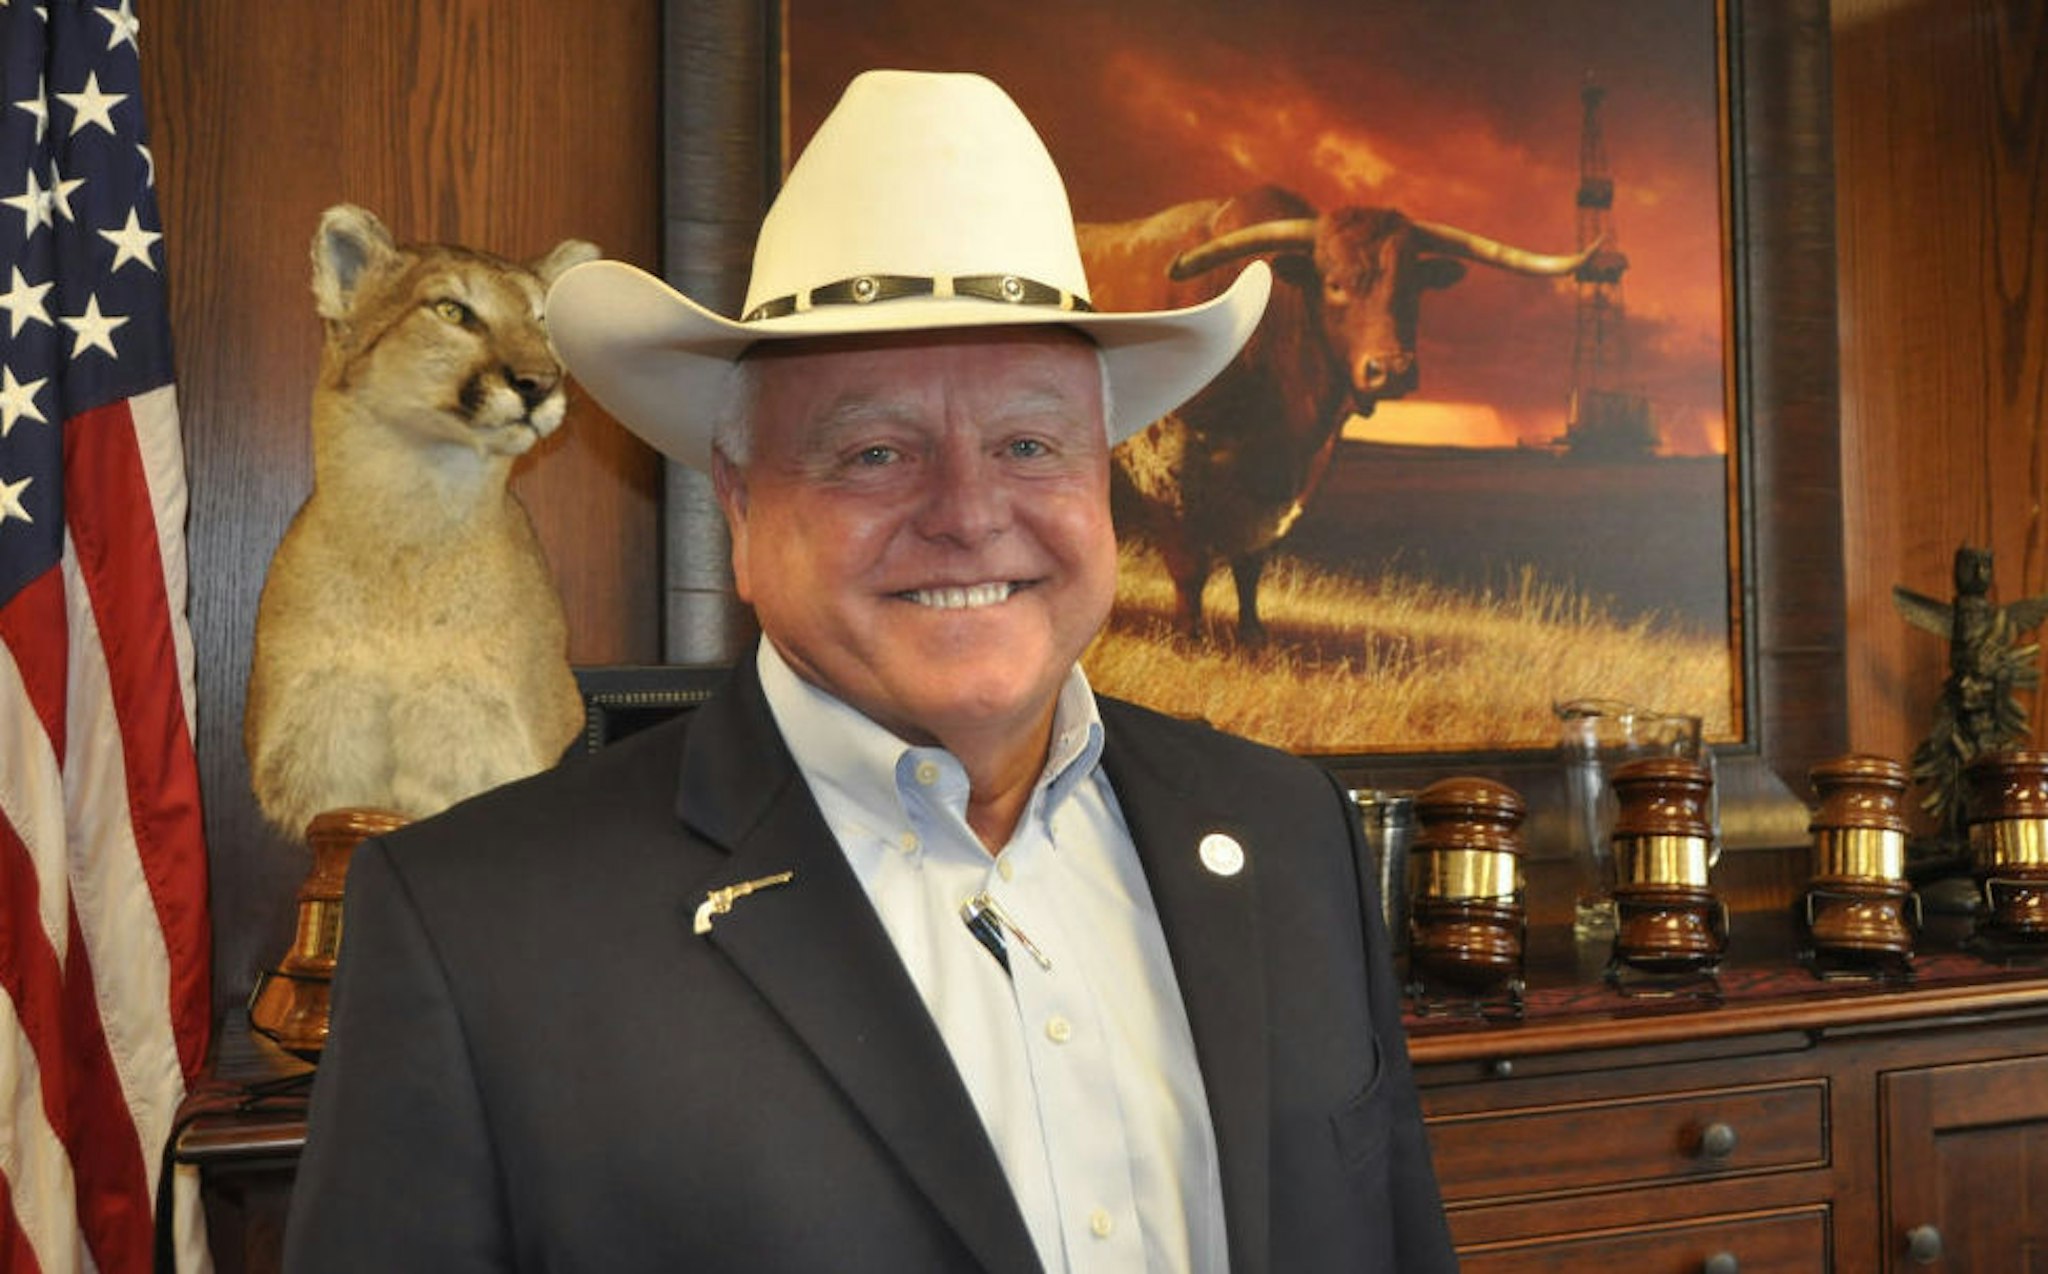 exas state Agriculture Commissioner Sid Miller stands in his office in Austin, USA, 12 September 2016. Miller is part of Donald Trump's team of advisers.